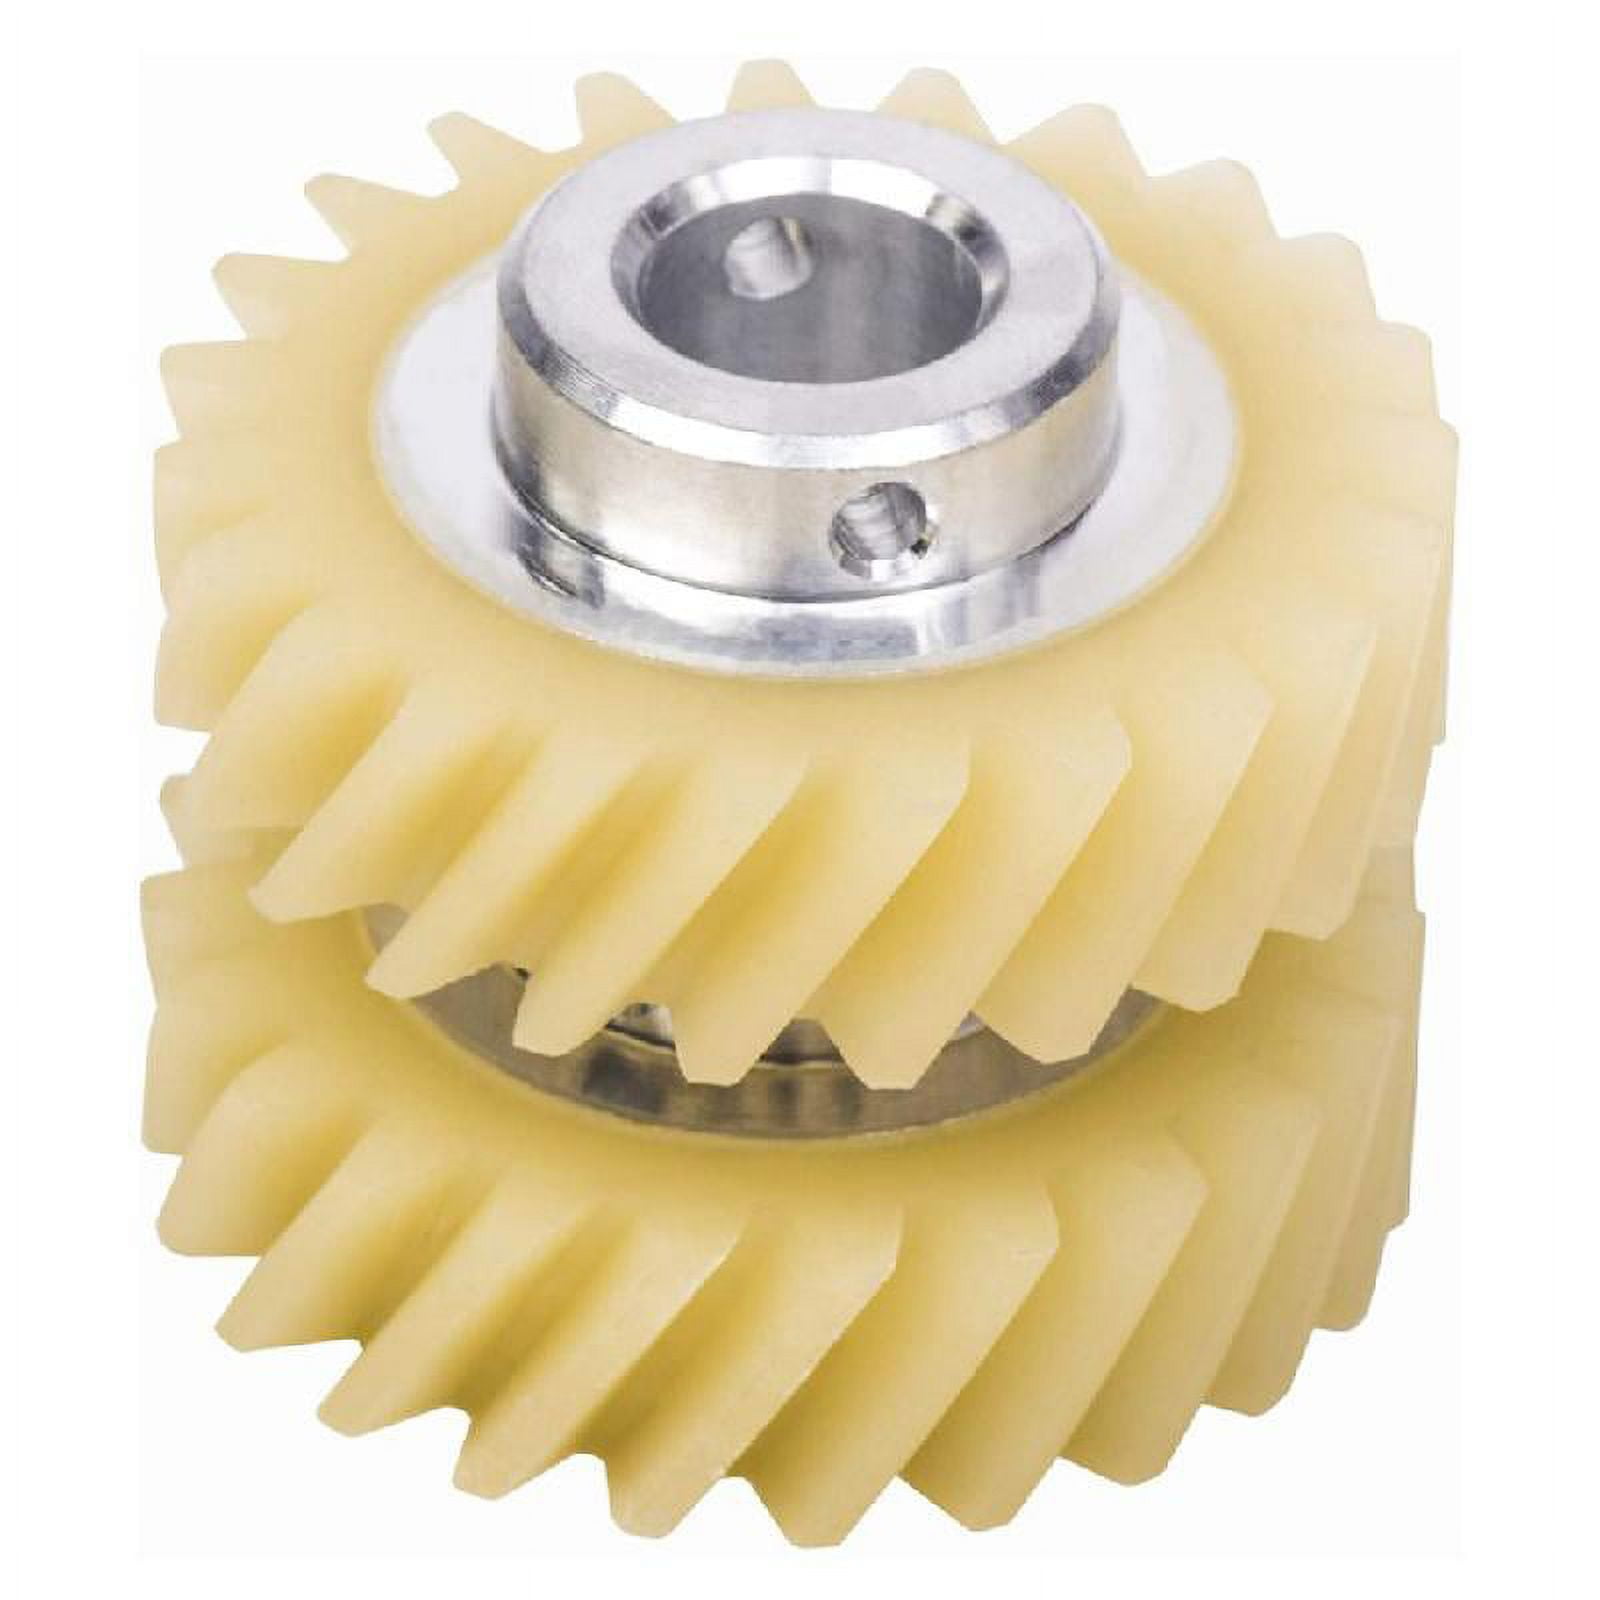 W10112253 & 240210-2 Mixer Worm Gear Kit Compatible with Most of Whirlpool  & KitchenAid Stand Mixer, Included 4162324 Gasket and Food Grade Grease 